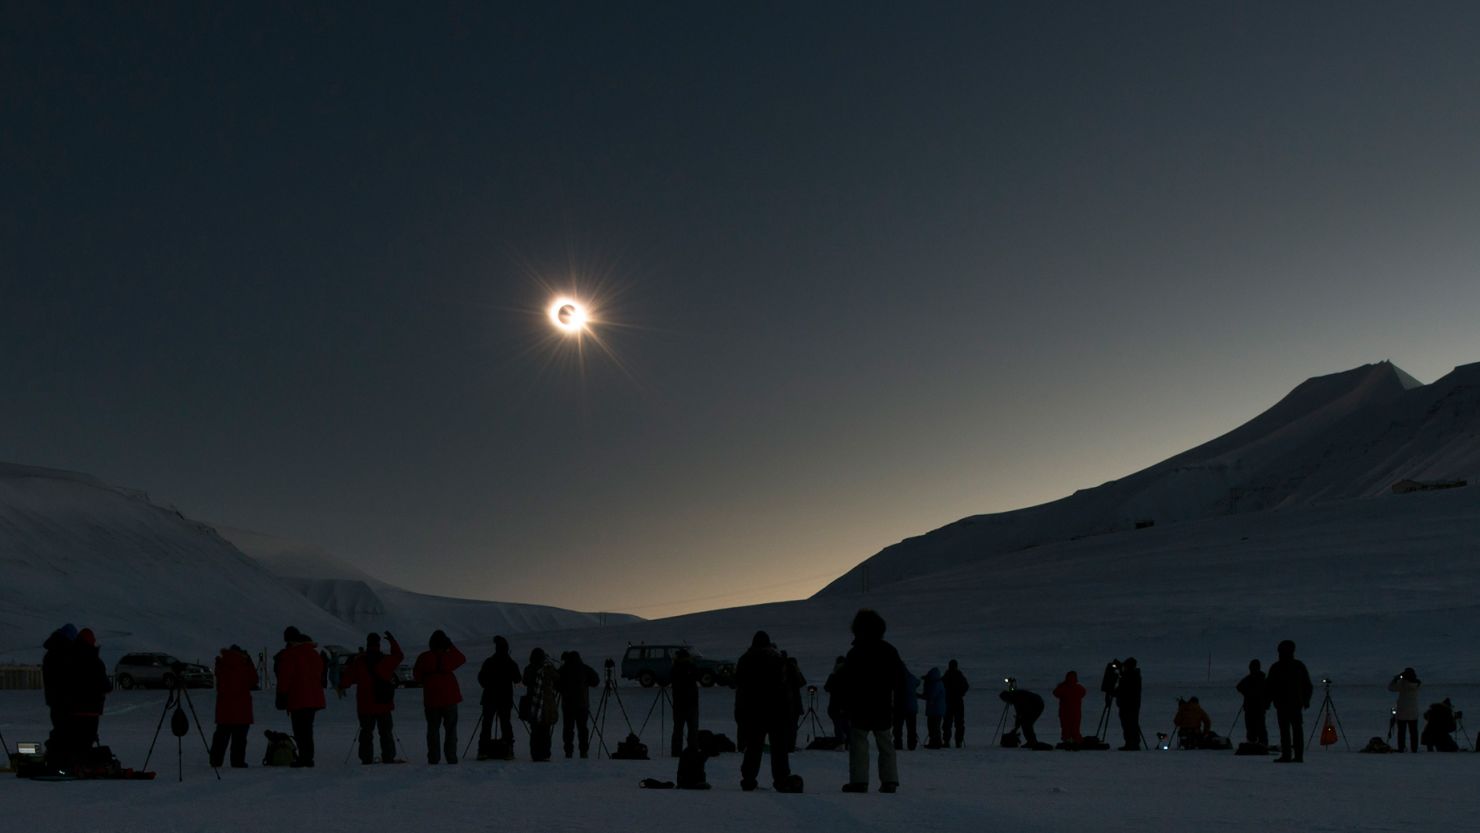 Astrophotographer Stan Honda calls his first experience with a total solar eclipse "a pretty remarkable scene." It occurred in March 2015 in Svalbard, a Norwegian archipelago in the Arctic Ocean.